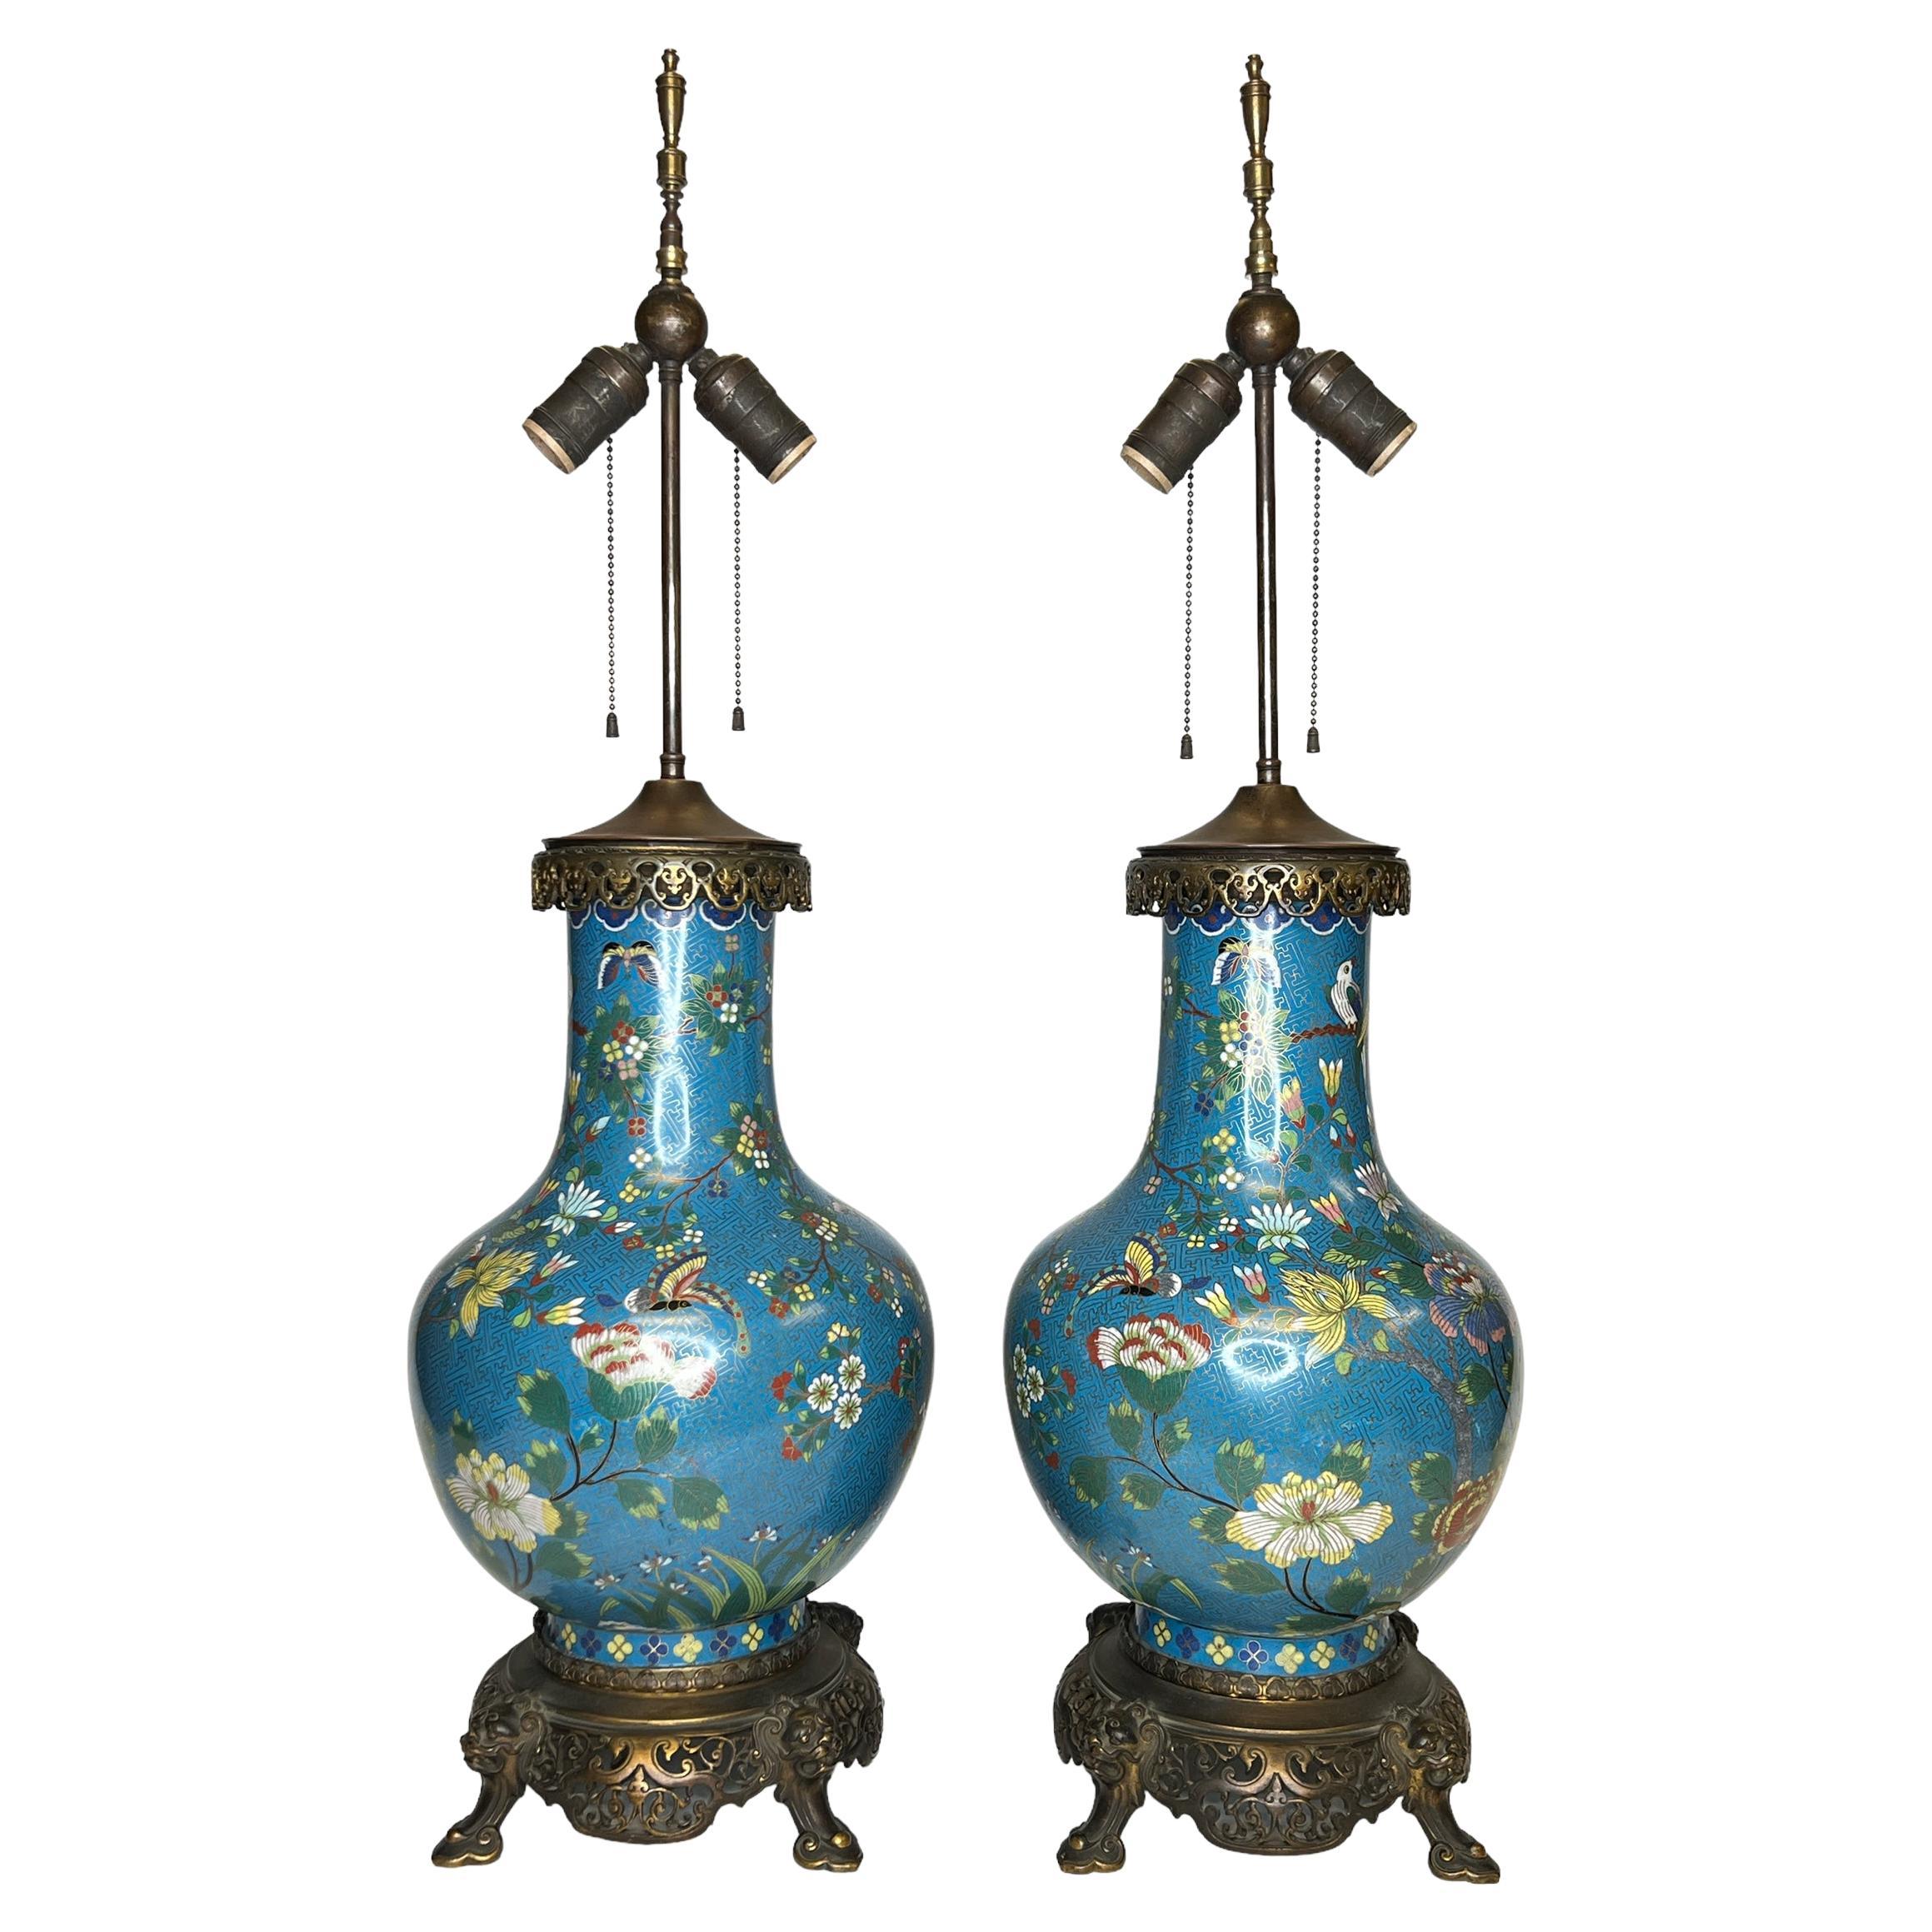 Pair of French Bronze Mounted Chinese Cloisonne Table Lamps